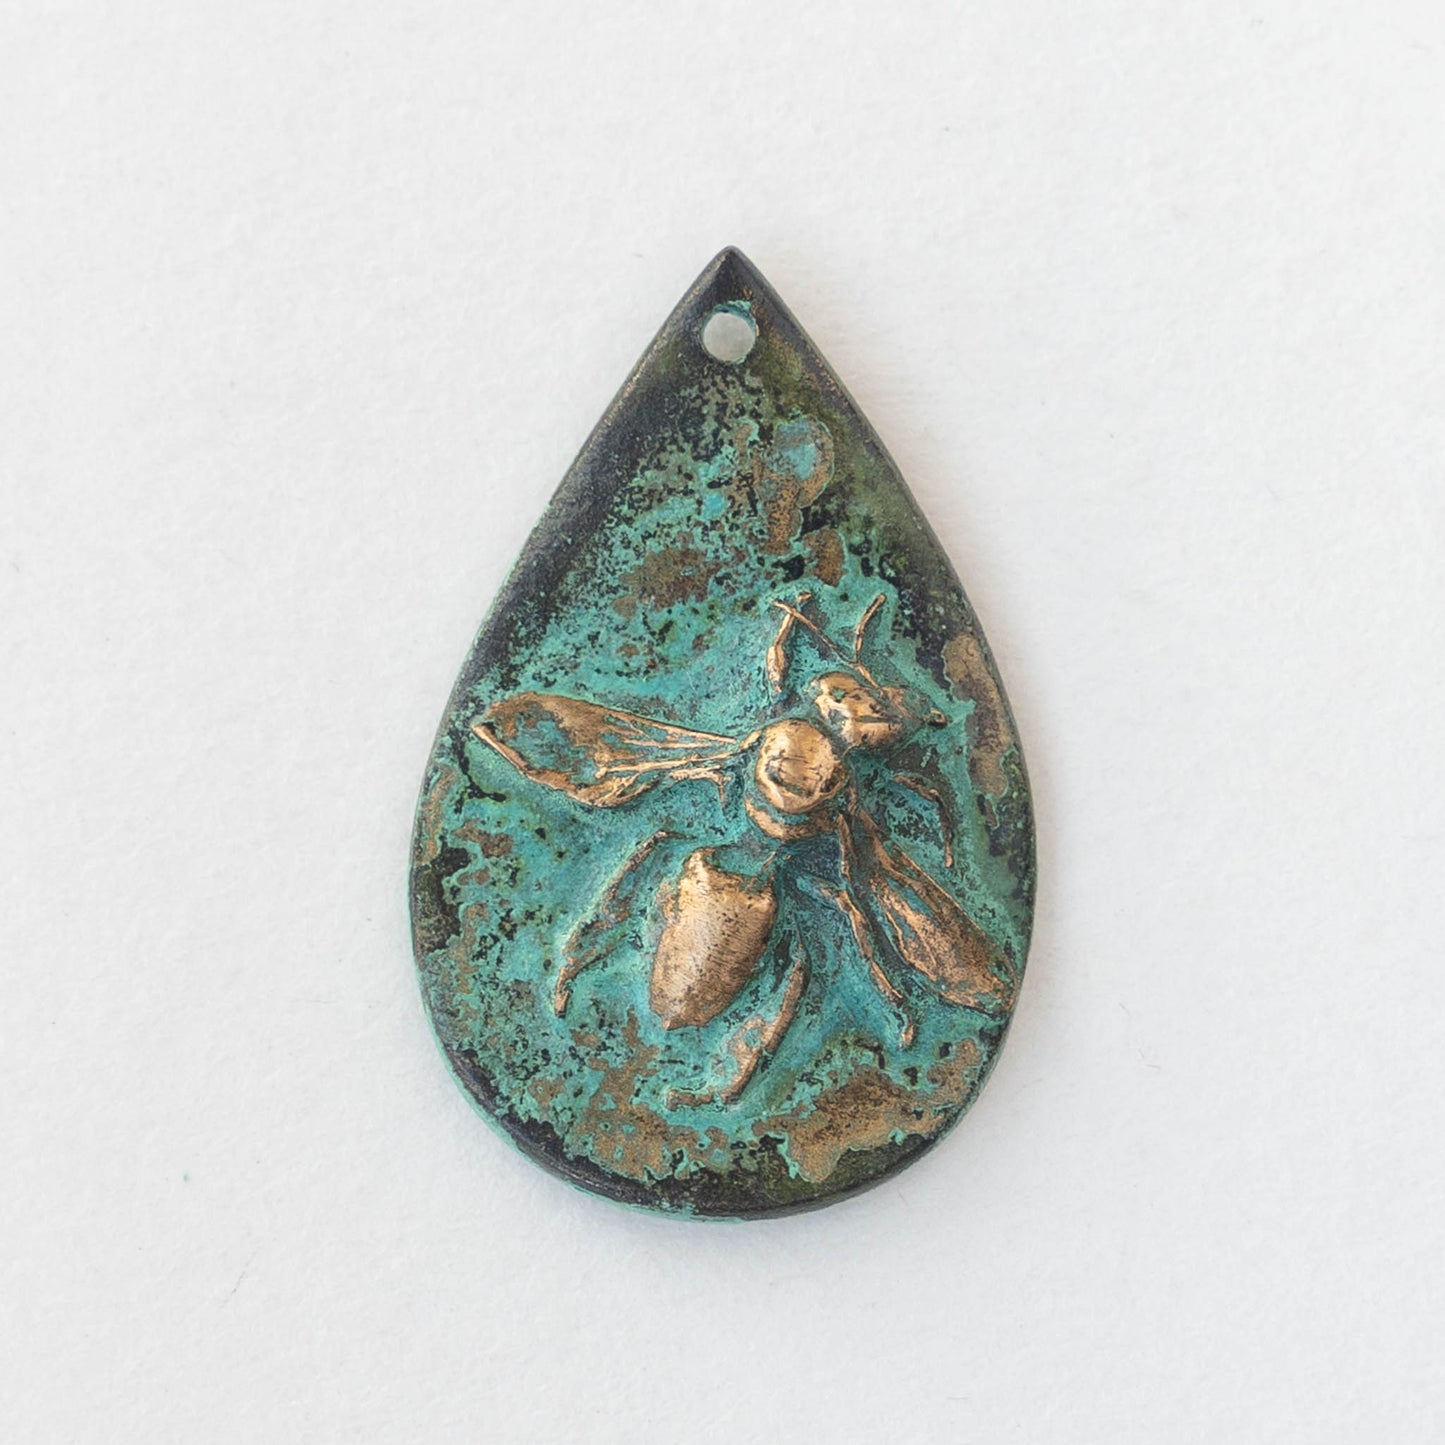 Load image into Gallery viewer, Bronze Honey BeeTeardrop Pendant with a Verde Gris Patina
